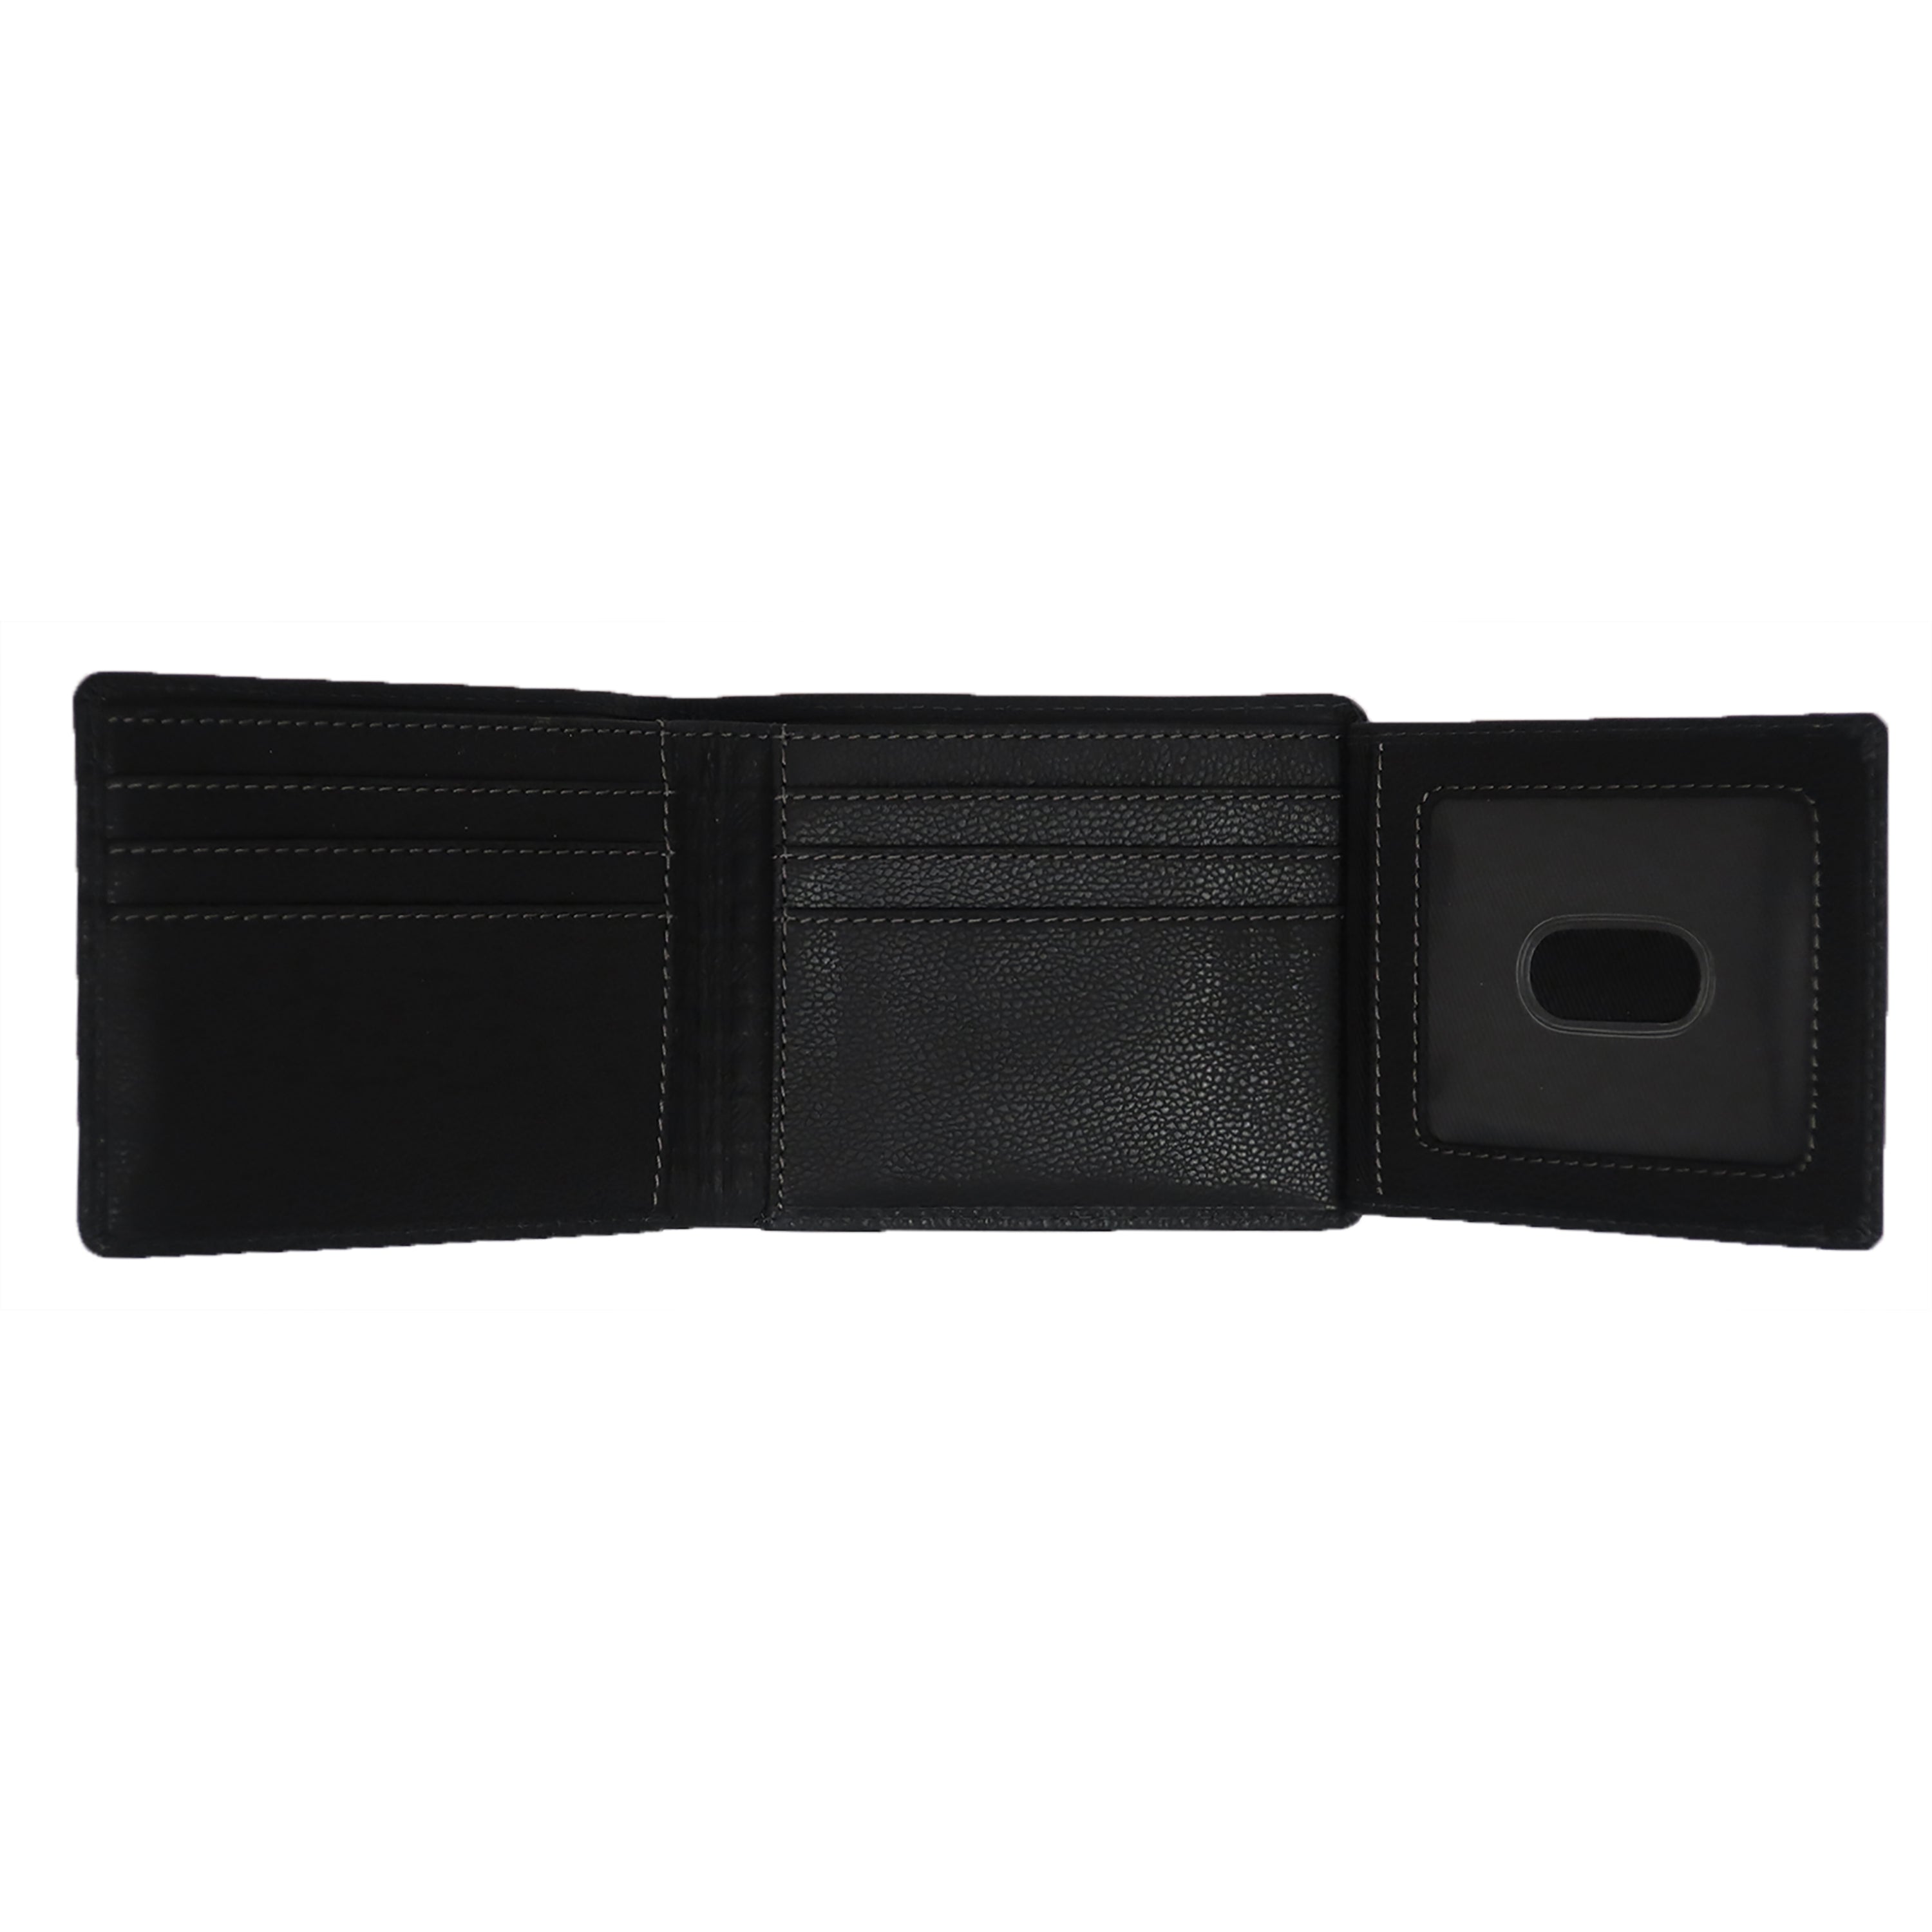 inside view bifold with flip out id window, black